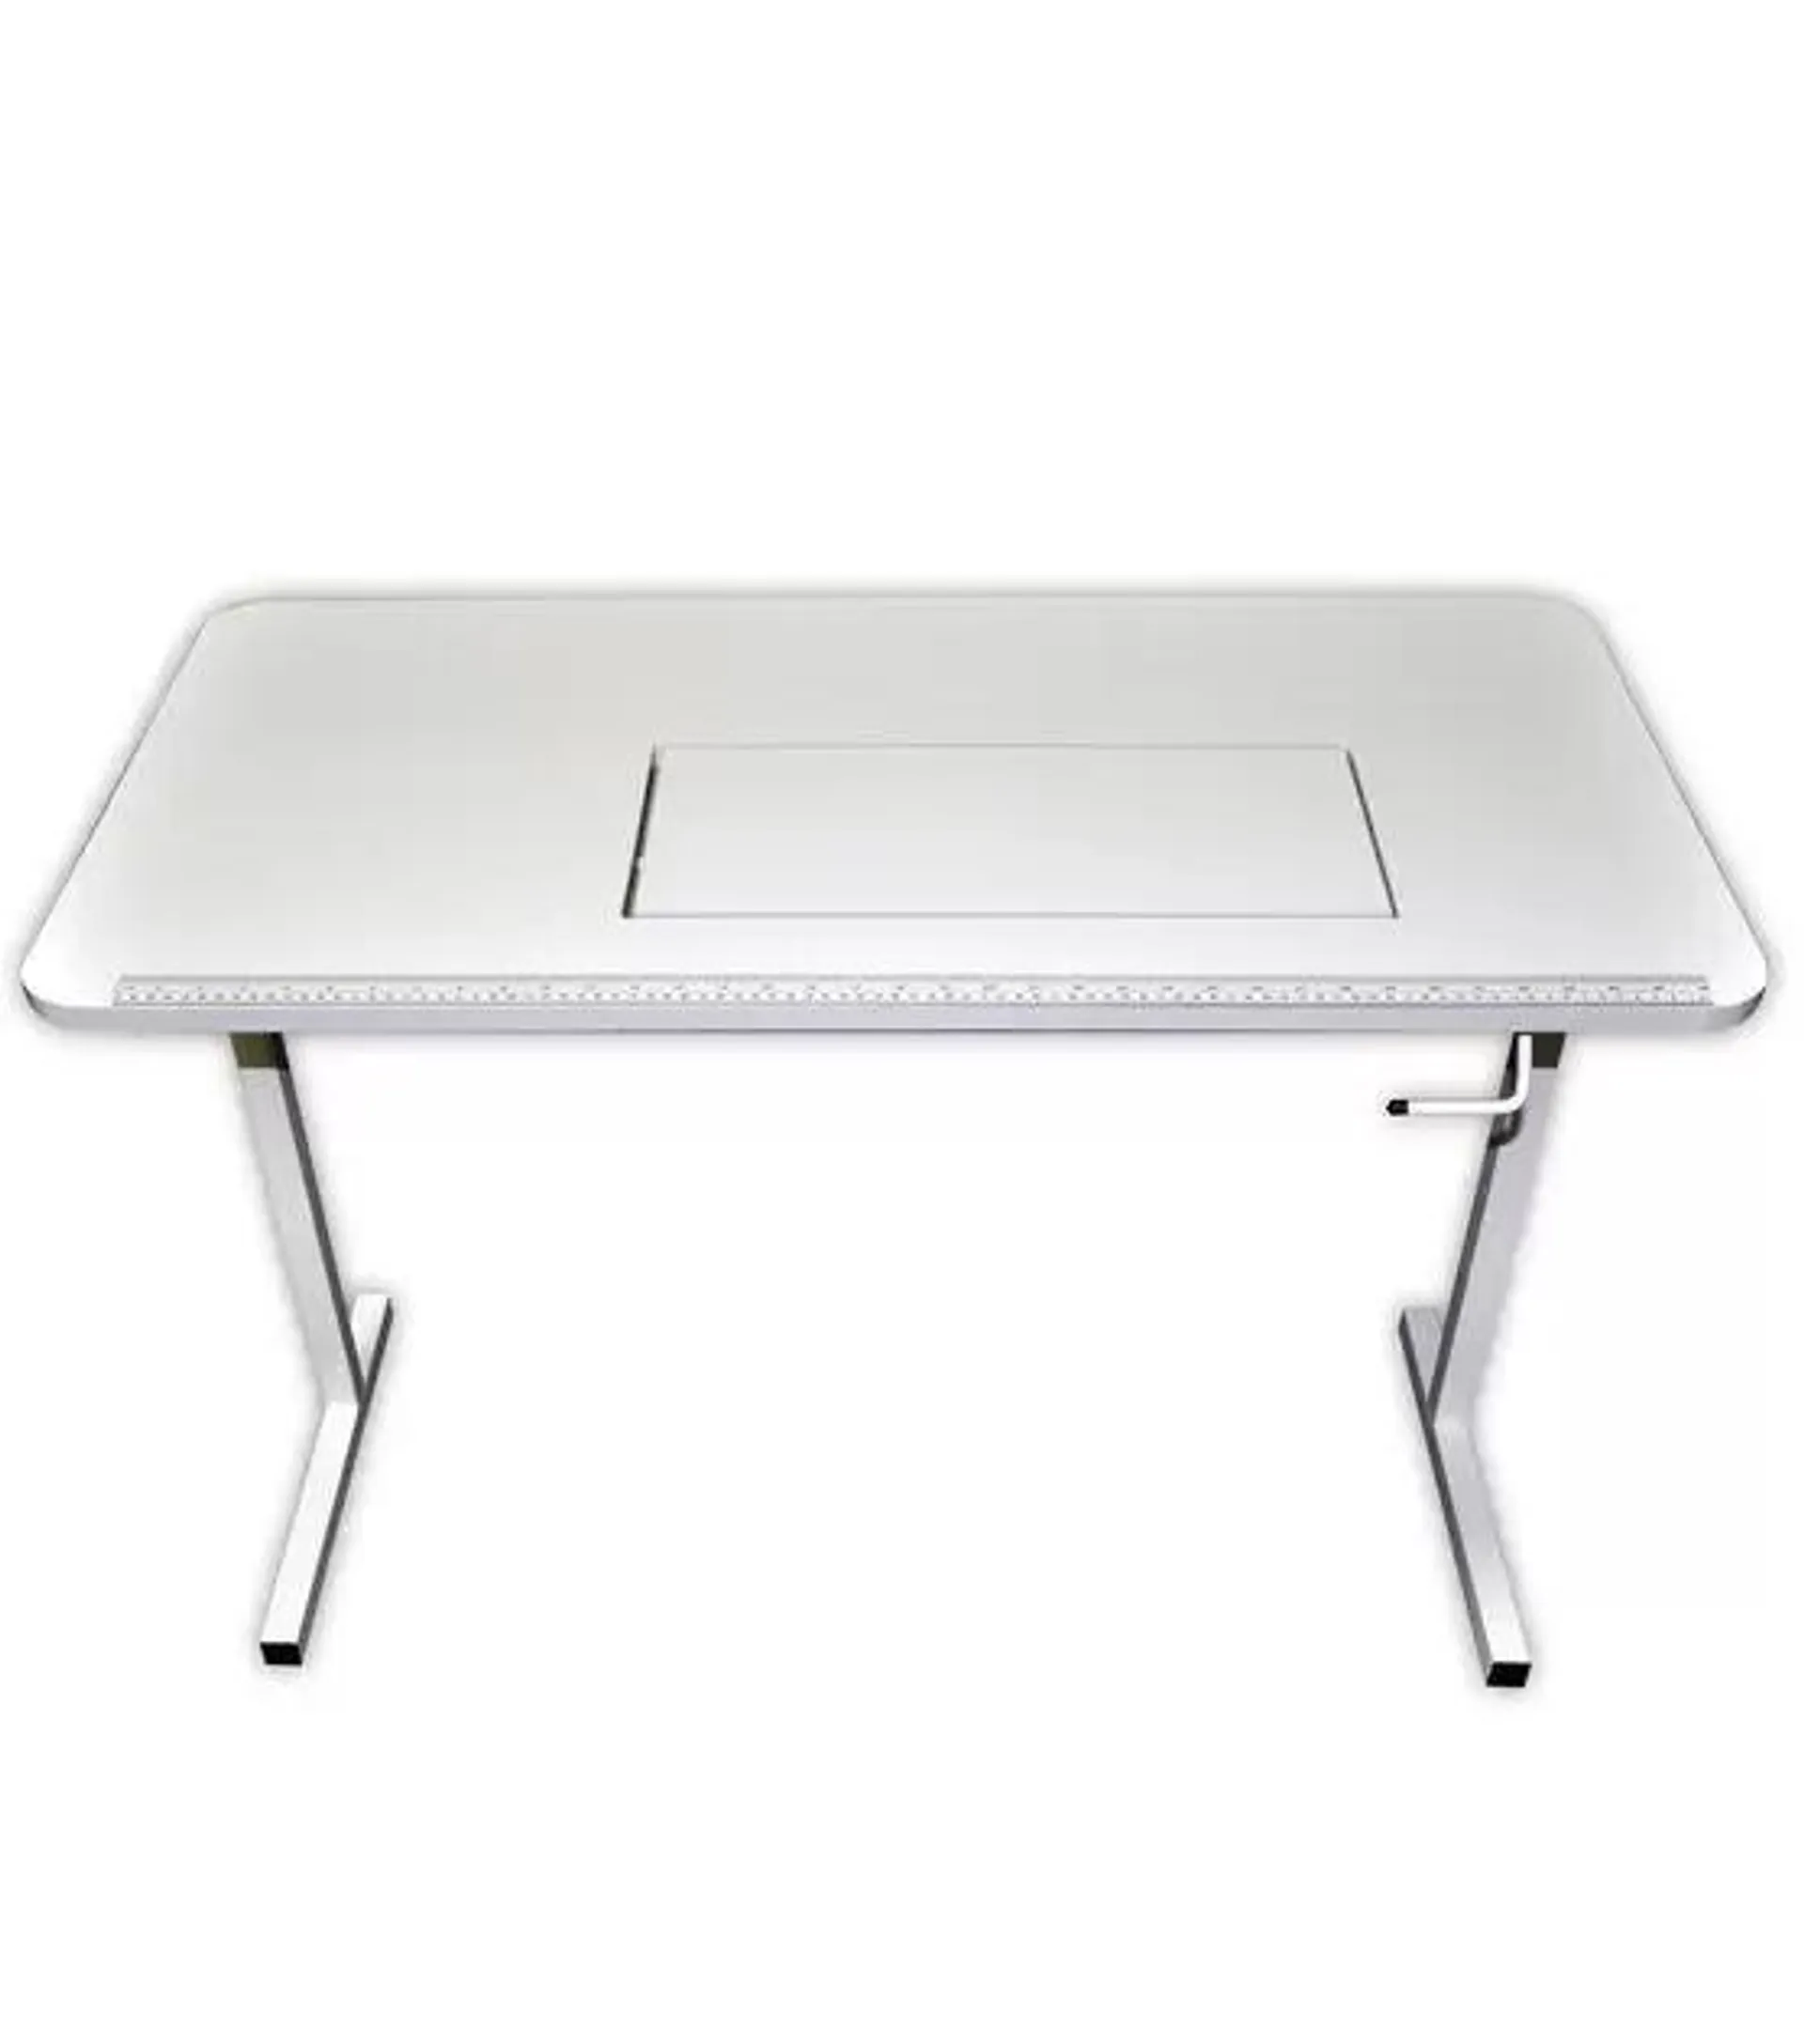 Sullivans Folding & Portable Sewing Table